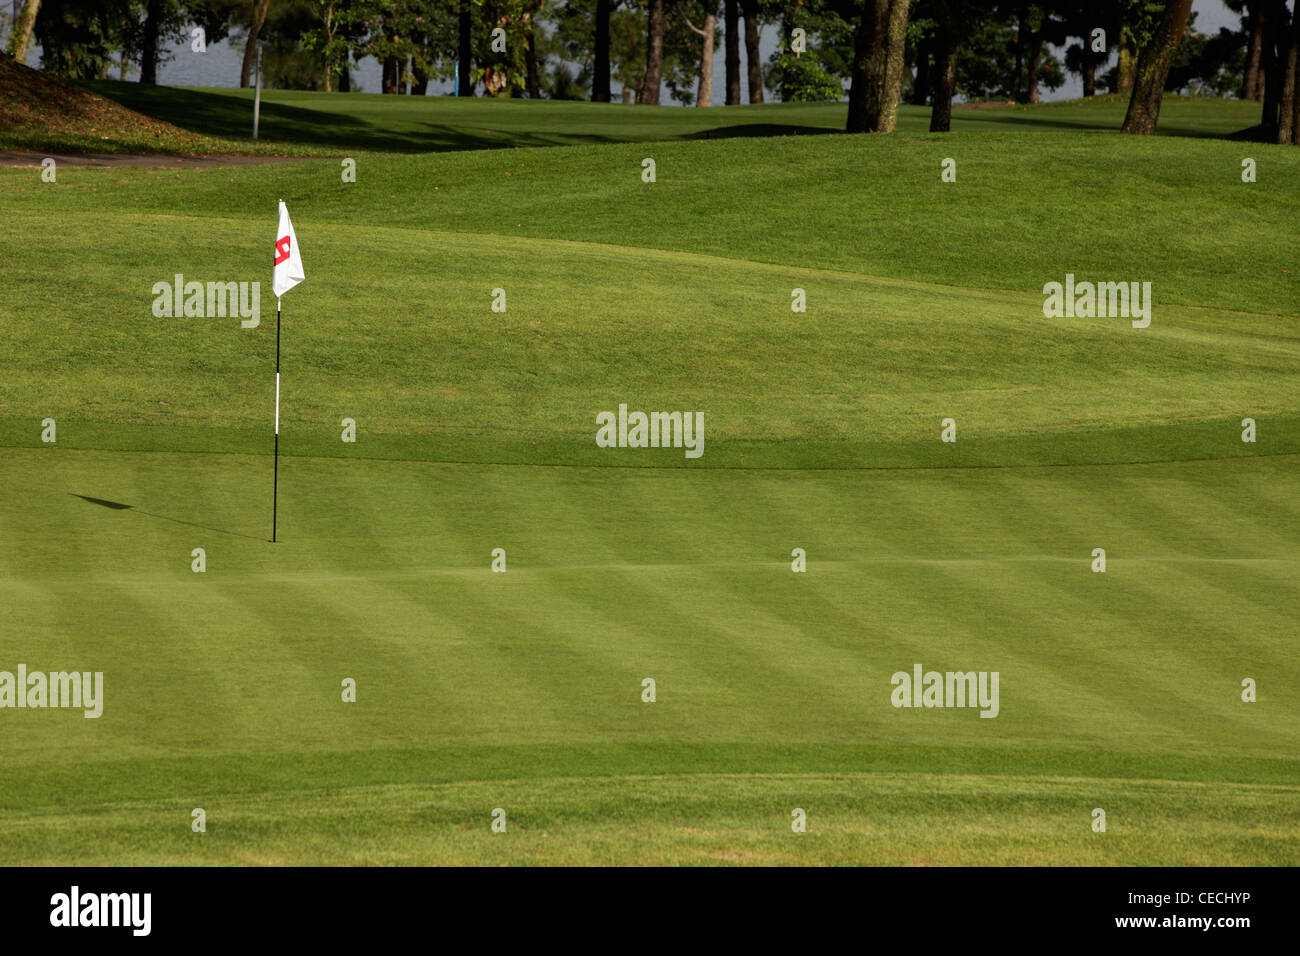 Golf course green with 8th hole flag. Stock Photo